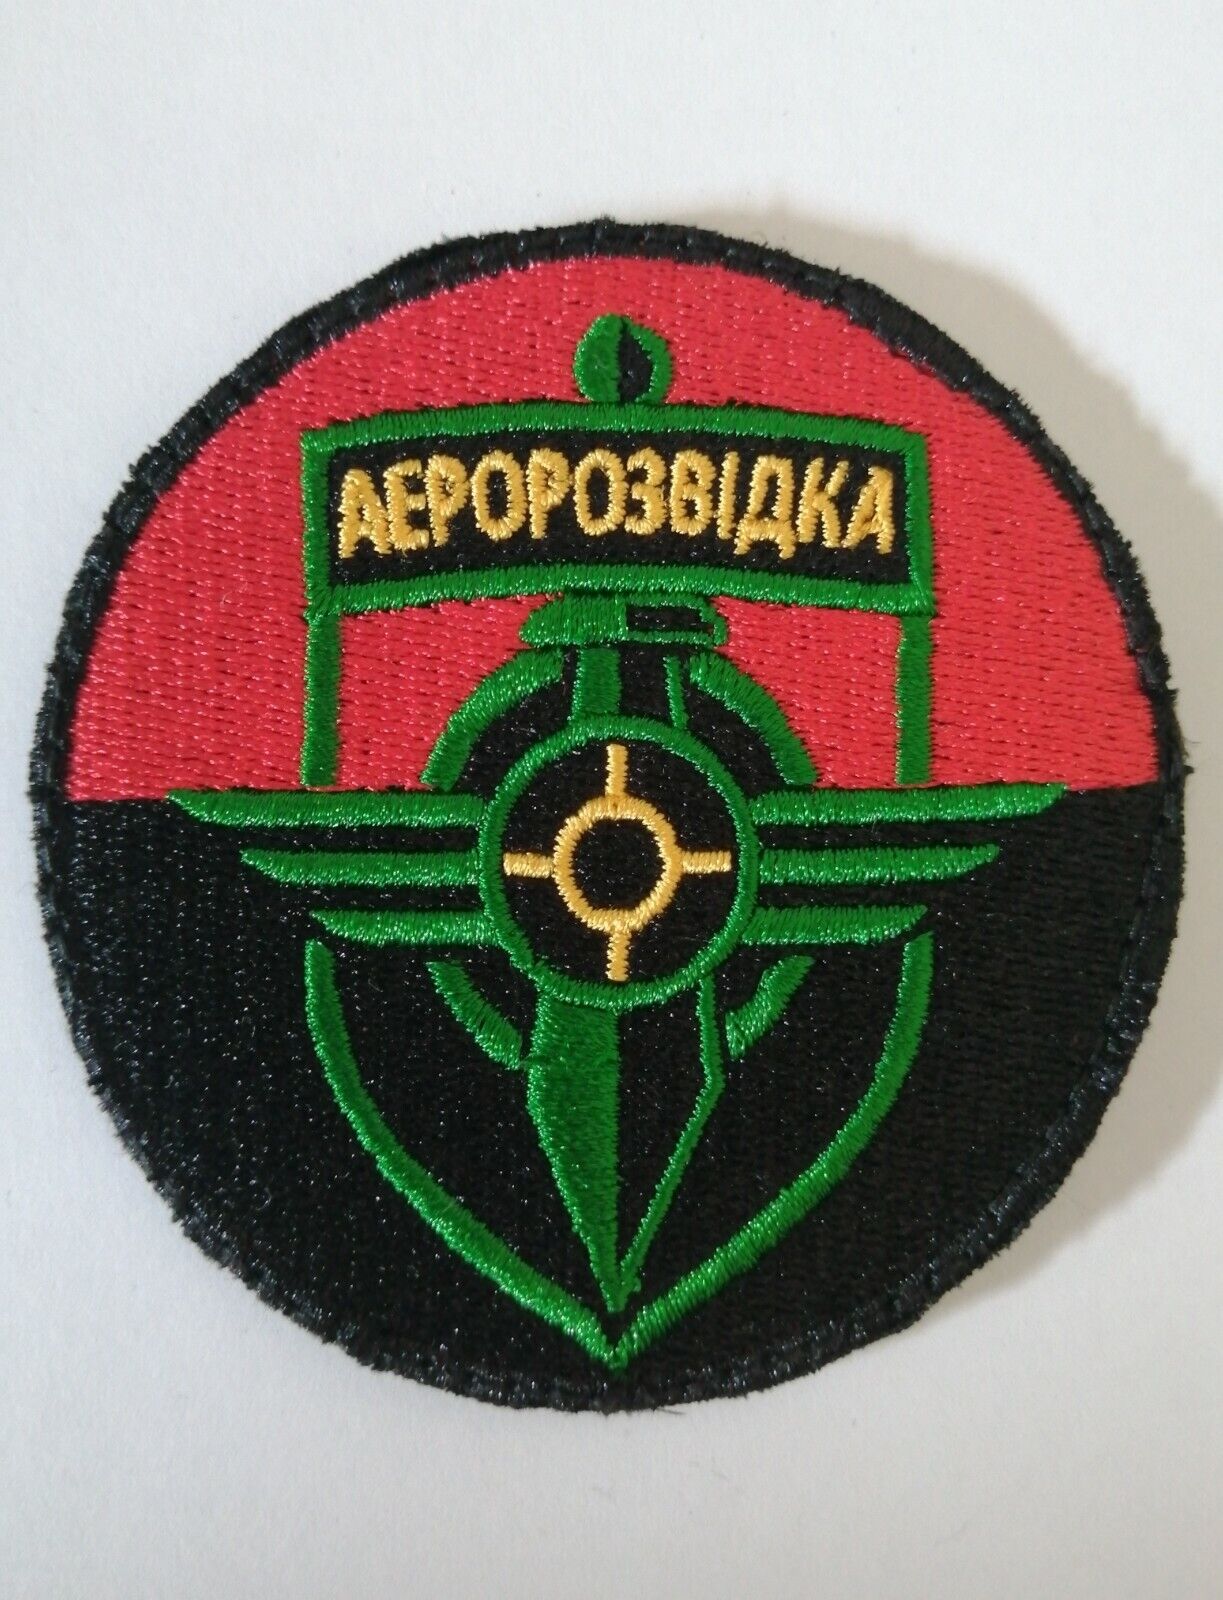 Ukraine: embroidered aerorozvidka patch, unit specialised in use of drones.